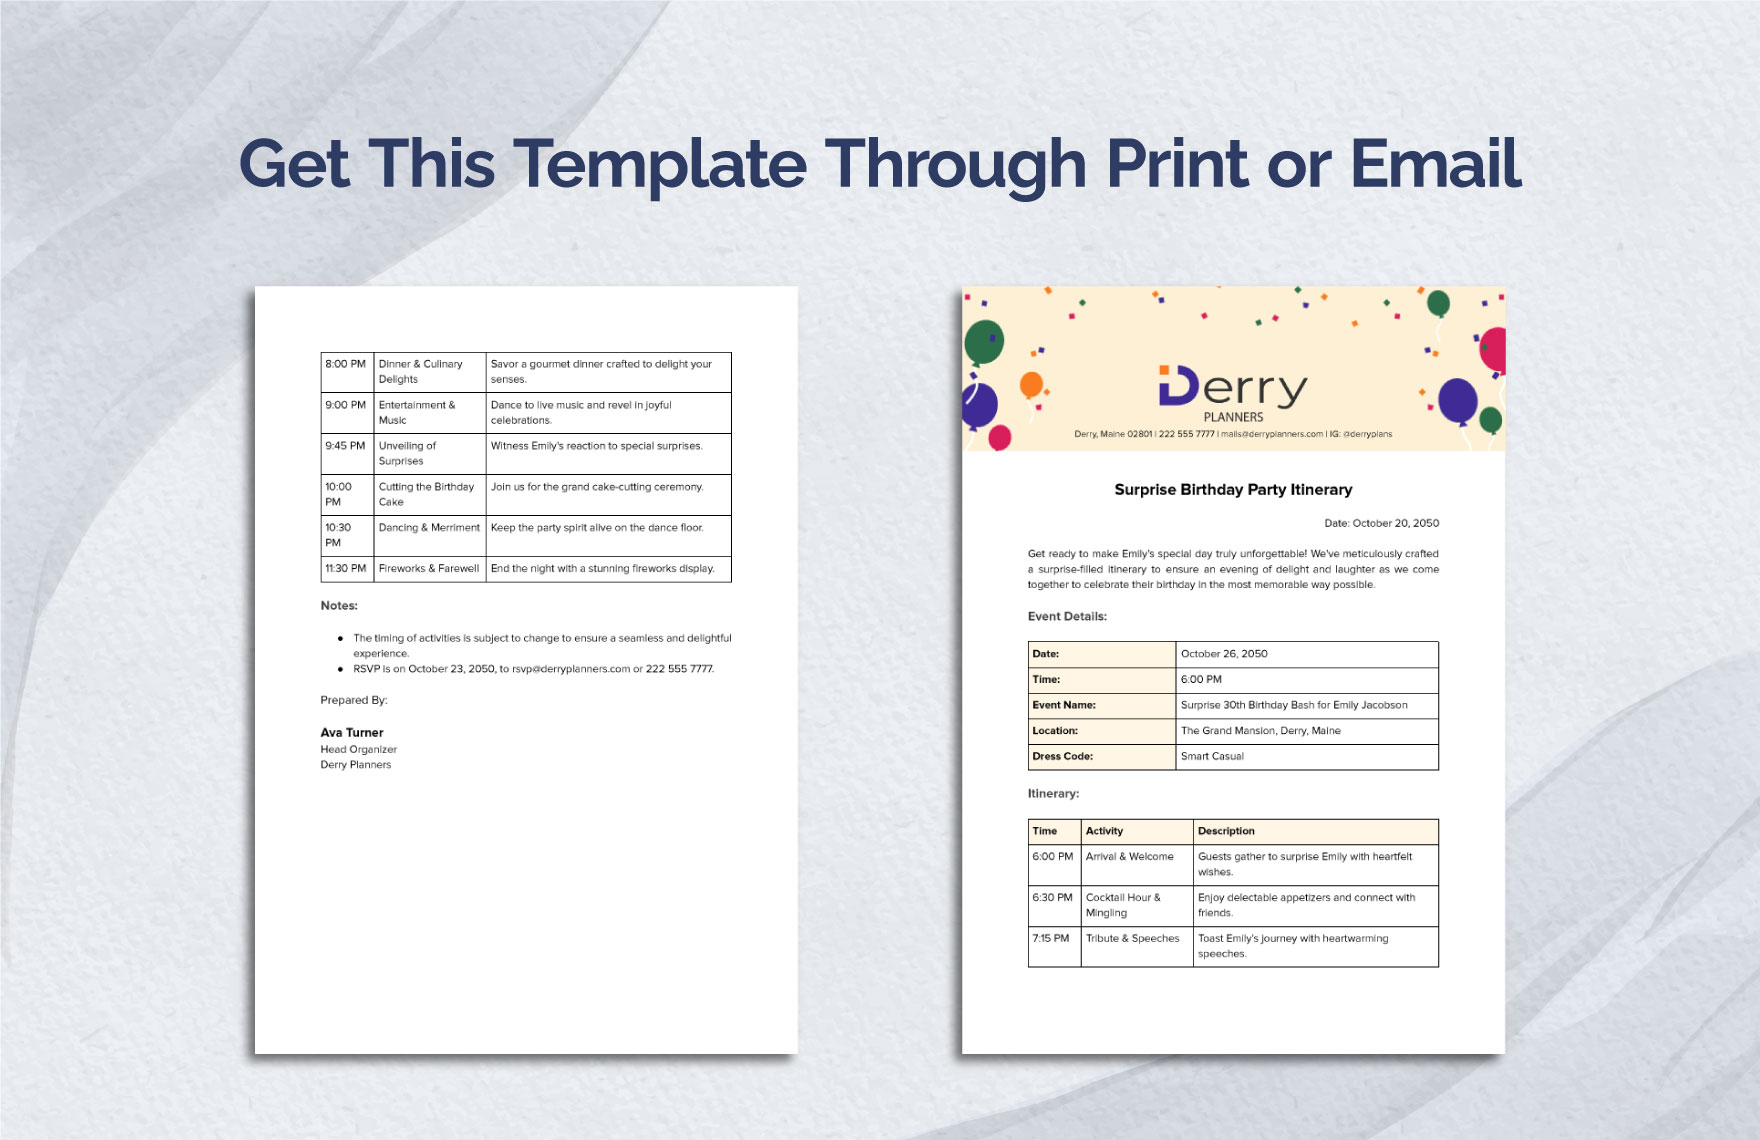 Surprise Birthday Party Itinerary Template